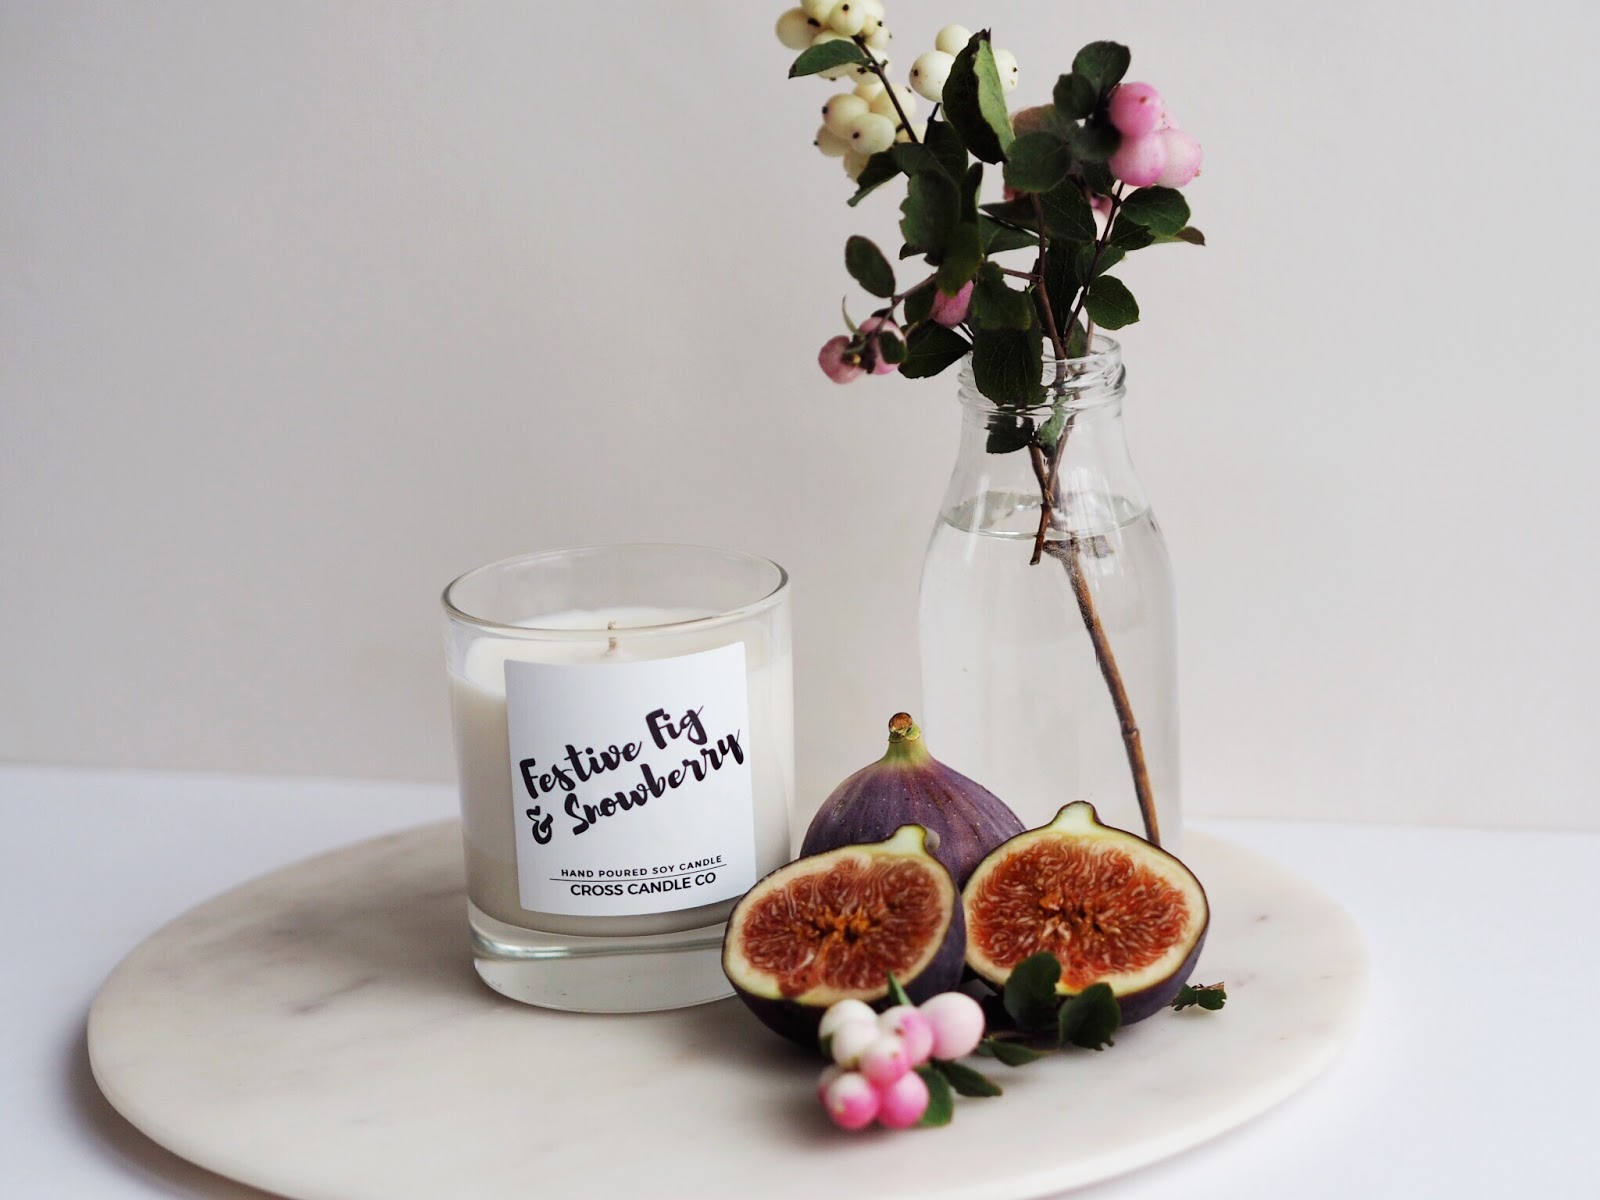 Lifestyle | A New Venture & Giveaway - Cross Candle Co